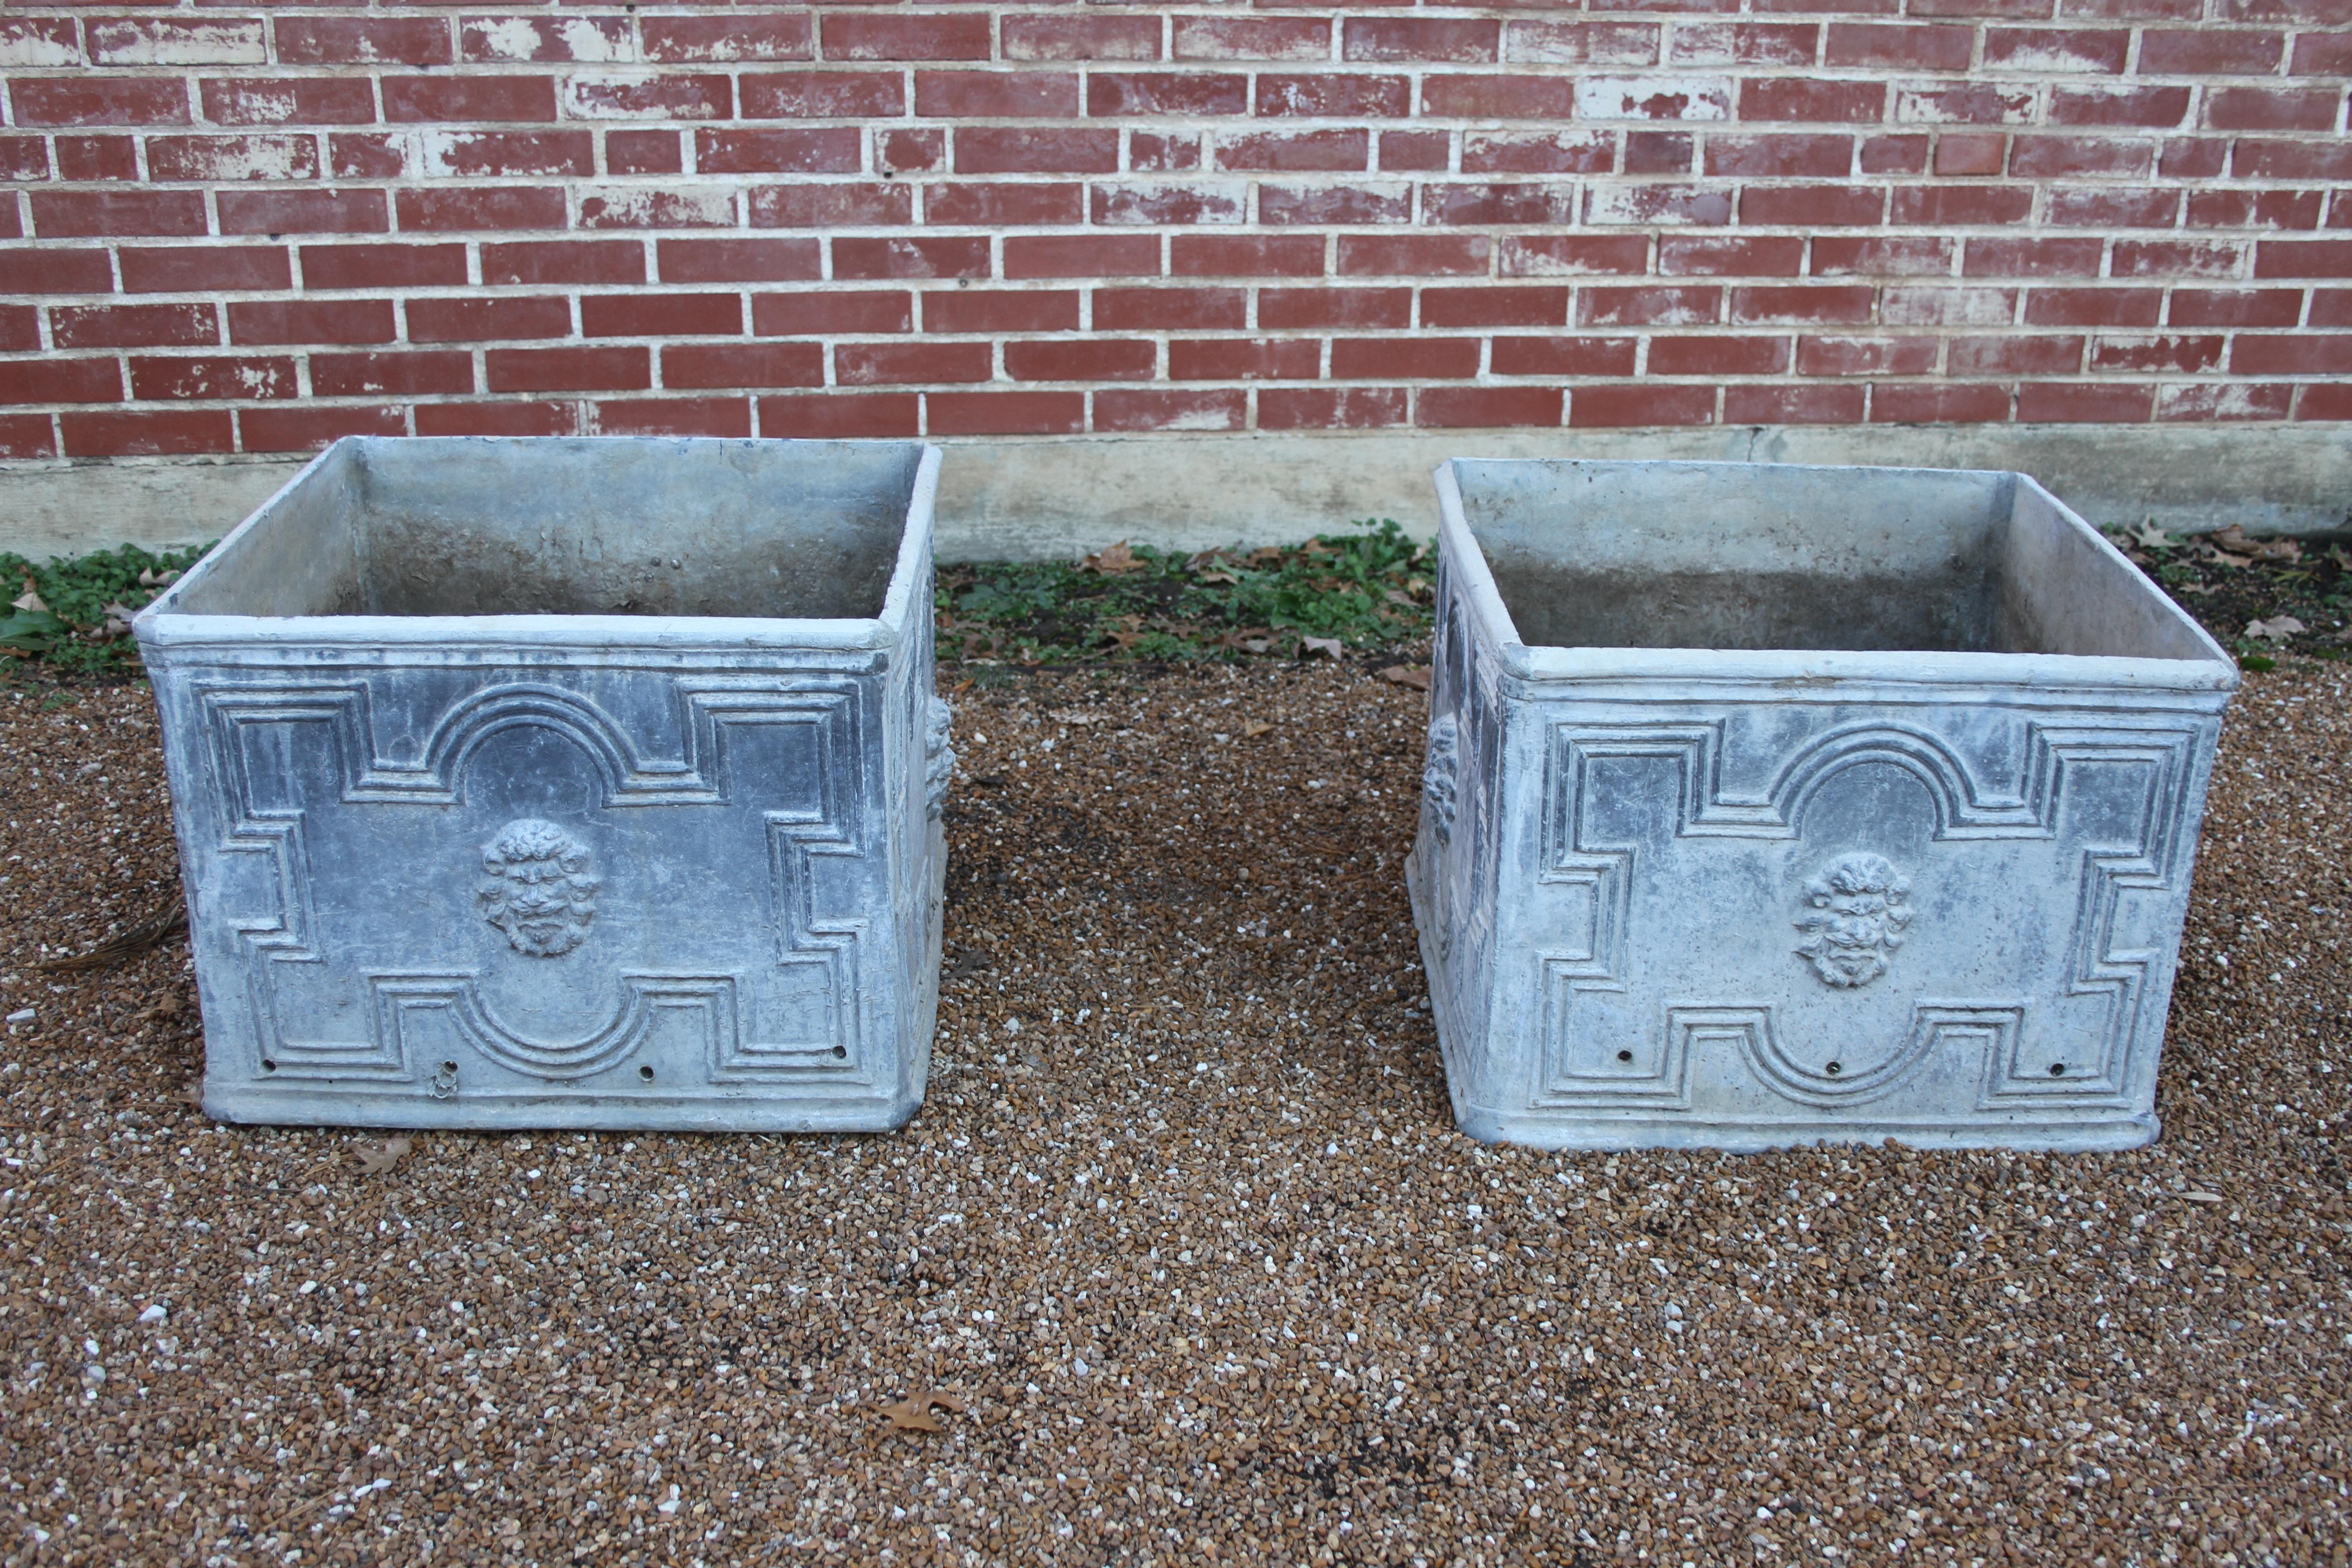 Pair of Square Antique English Lead Jardinieres with Lion Heads Planter Boxes  2